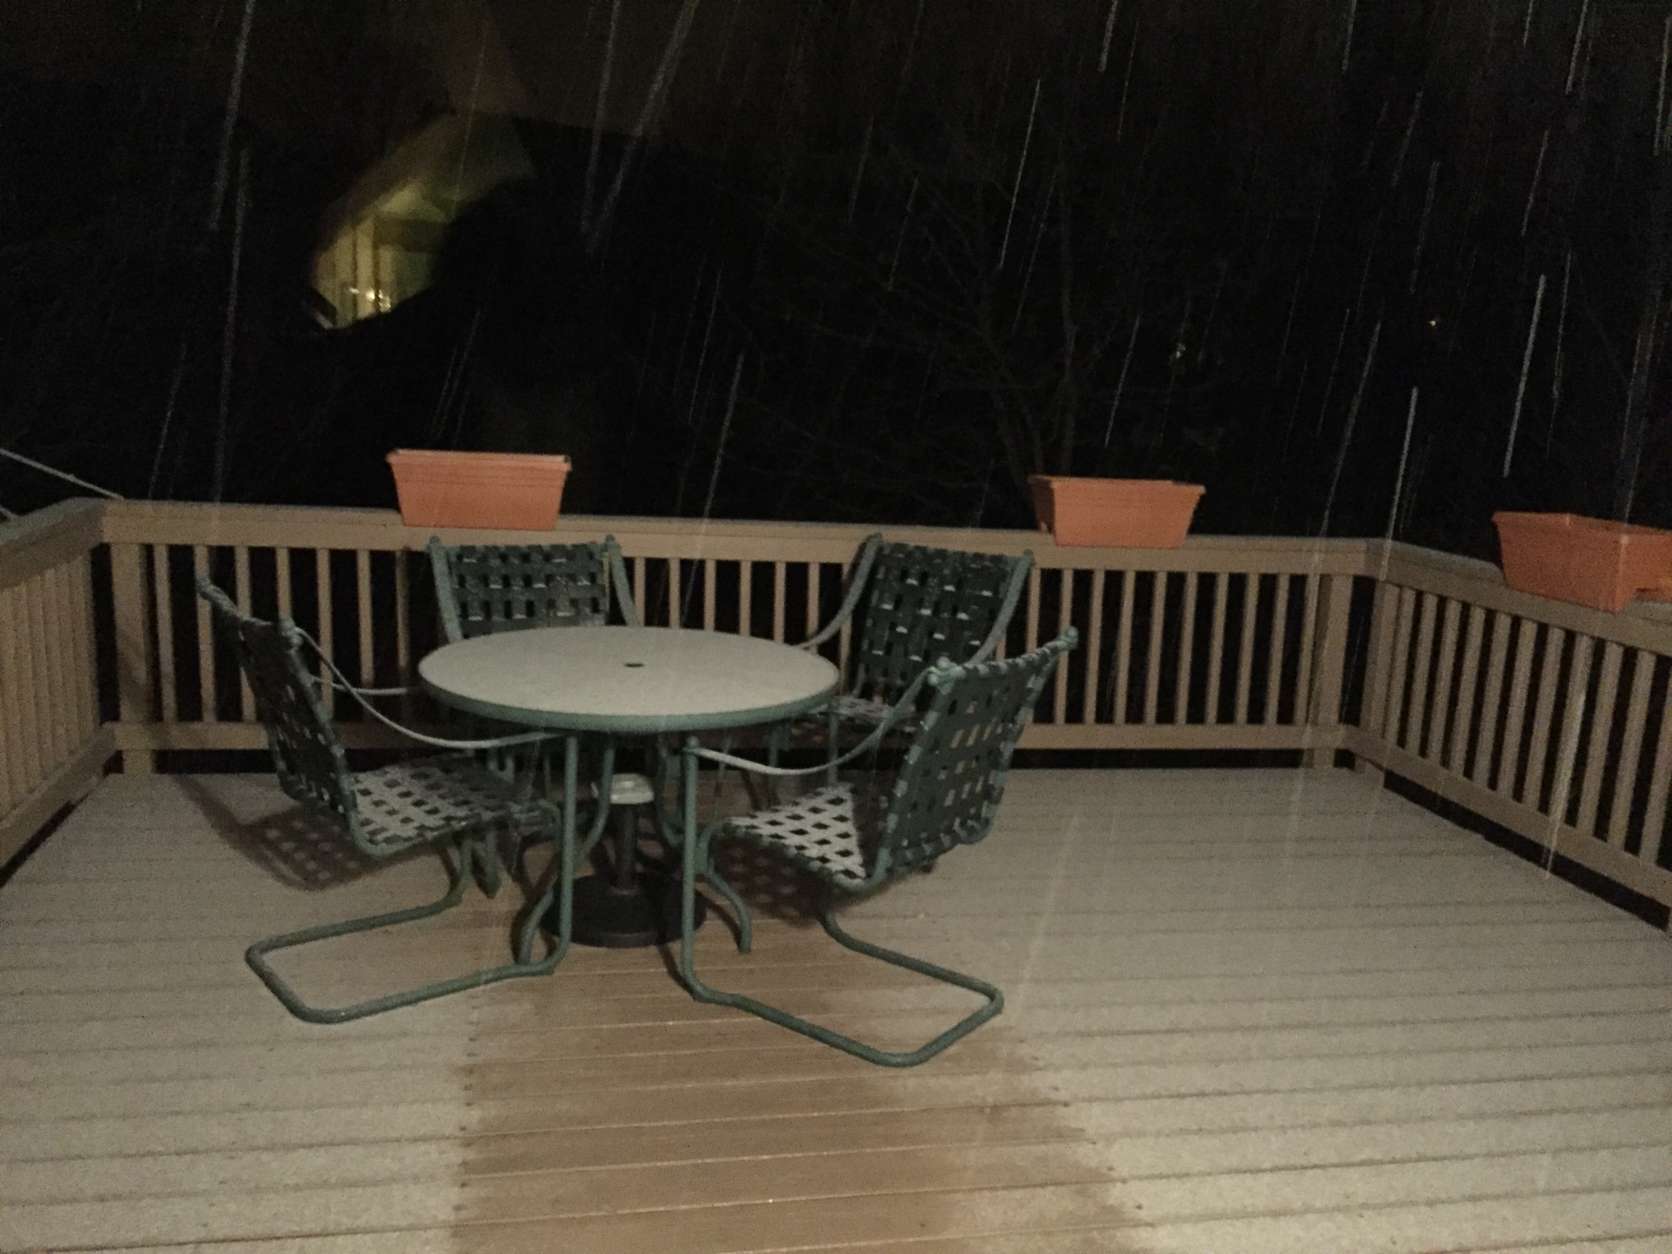 Snow begins to fall in Germantown, Maryland early Monday. (WTOP/Mike Jakaitas)